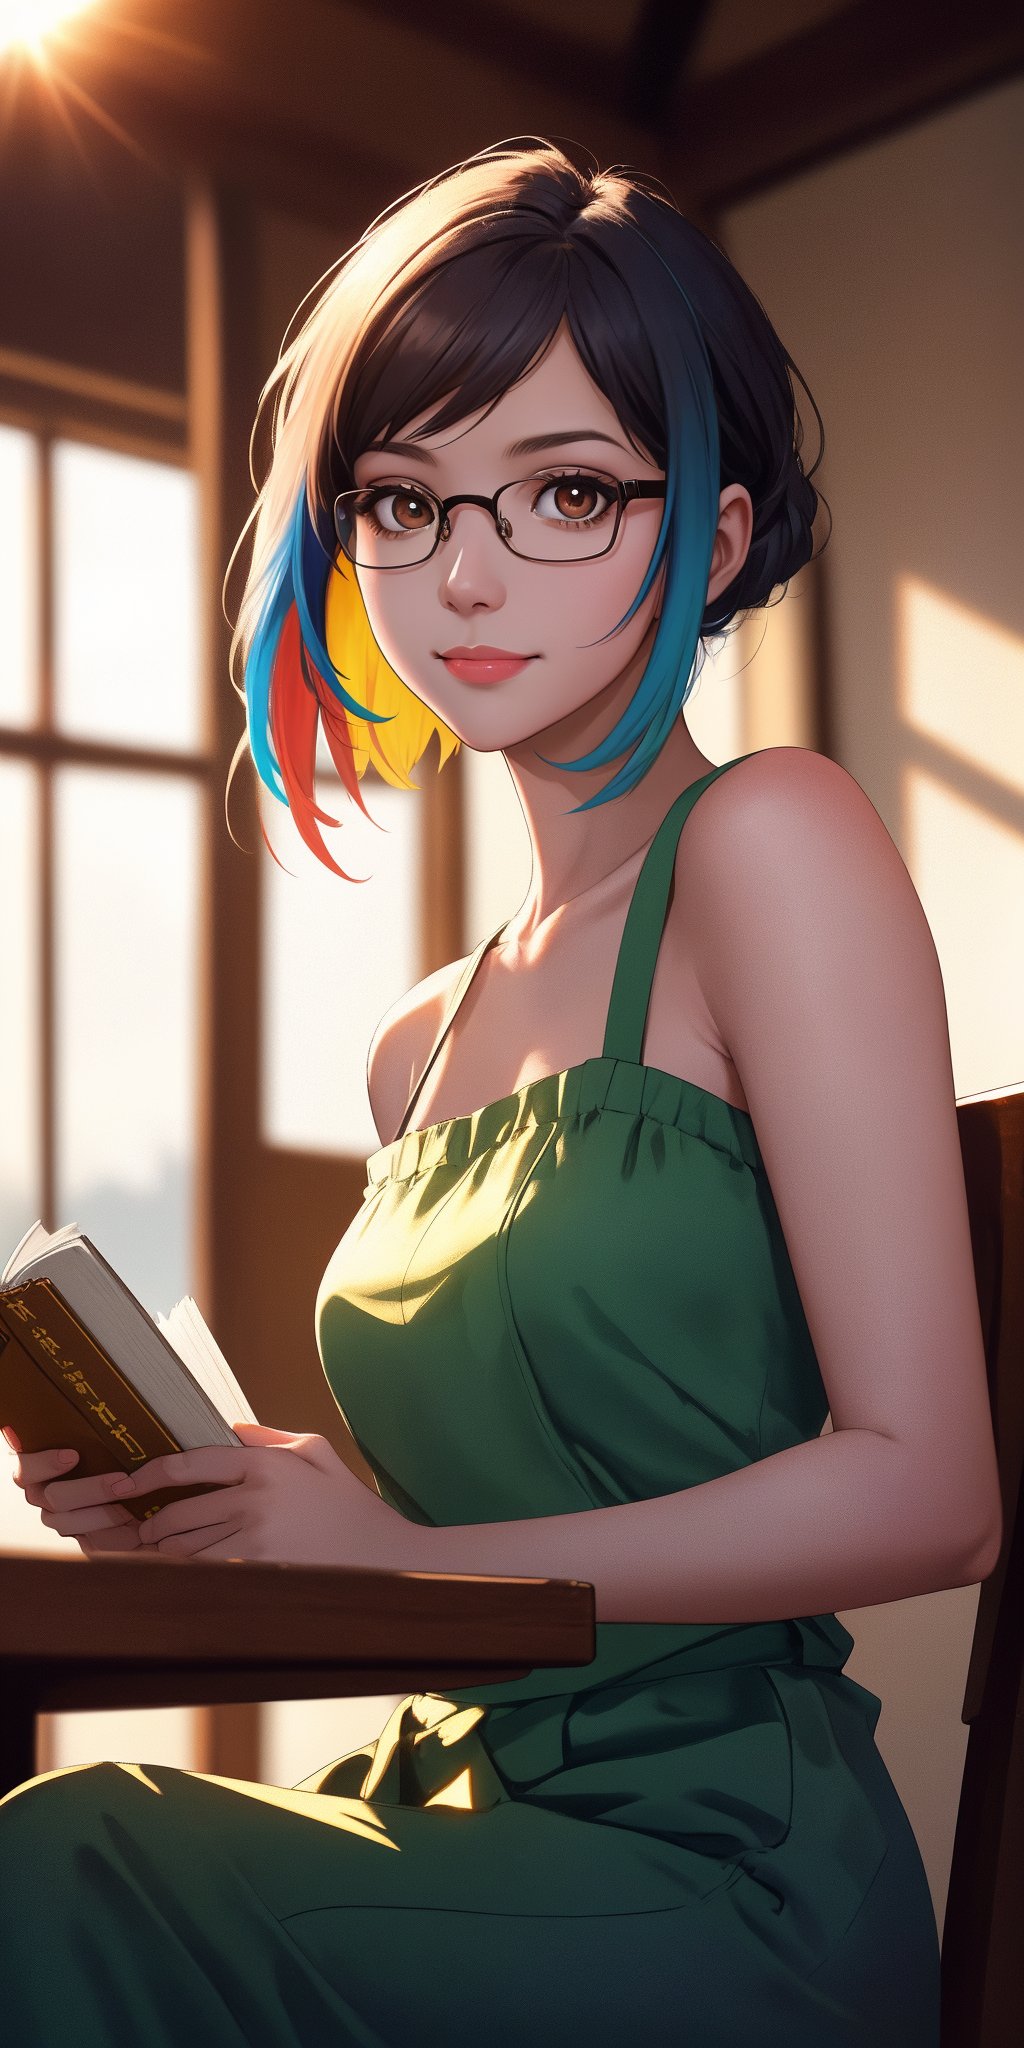 Our 20-year-old Japanese girl, with big brown eyes,  glasses, bob hair, and a shy smile, sits in the cozy cafe. She wears a (string top:1.3), showcasing beautiful shoulders. Realistic hair. Detailed hair. The cinematic light casts a warm glow on her as she reads a captivating book or writes in her journal. The ultra-detailed 8K digital painting captures this serene moment, inviting viewers to imagine the story behind those expressive eyes. beautiful
This should be a ((masterpiece)) with a ((best_quality)) in ultra-high resolution, both ((4K)) and ((8K)), incorporating ((HDR)) for vividness. It uses a ((Kodak Portra 400)) lens for timeless, professional quality. Emphasizes a ((blurred background)) with a touch of ((bokeh)) and ((lens flare)) for an artistic effect. Enhance ((vibrant colors)) for a vivid look. Make sure the photograph is ((ultra-detailed)) and shows ((absurd)) details. Pay special attention to capturing the ((beautiful face)) of the subject. The goal is to create a ((professional photograph)) that is visually stunning and technically excellent.,MeikoDef,Detail